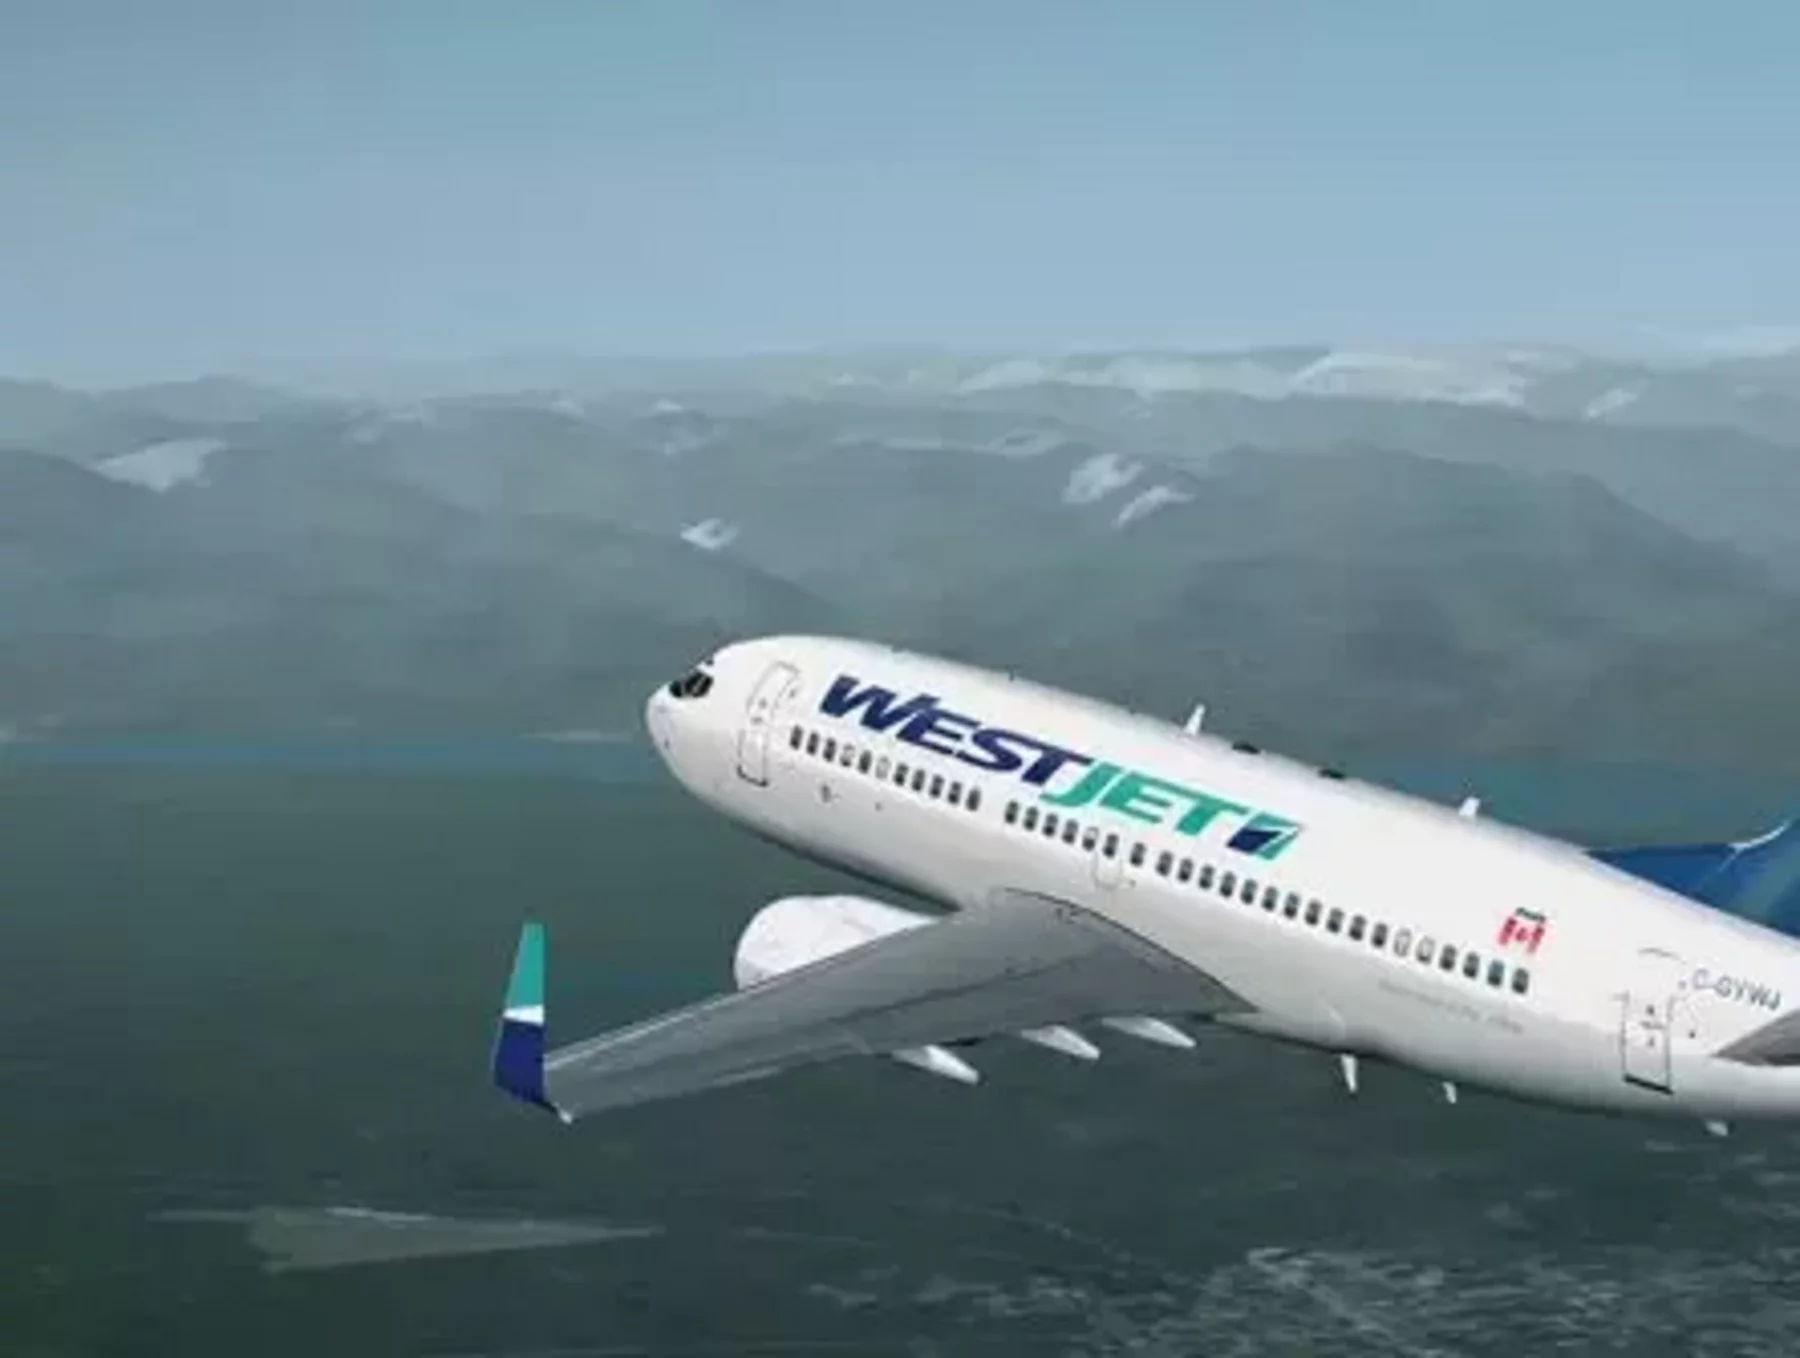 Fly with our codeshare partner WestJet